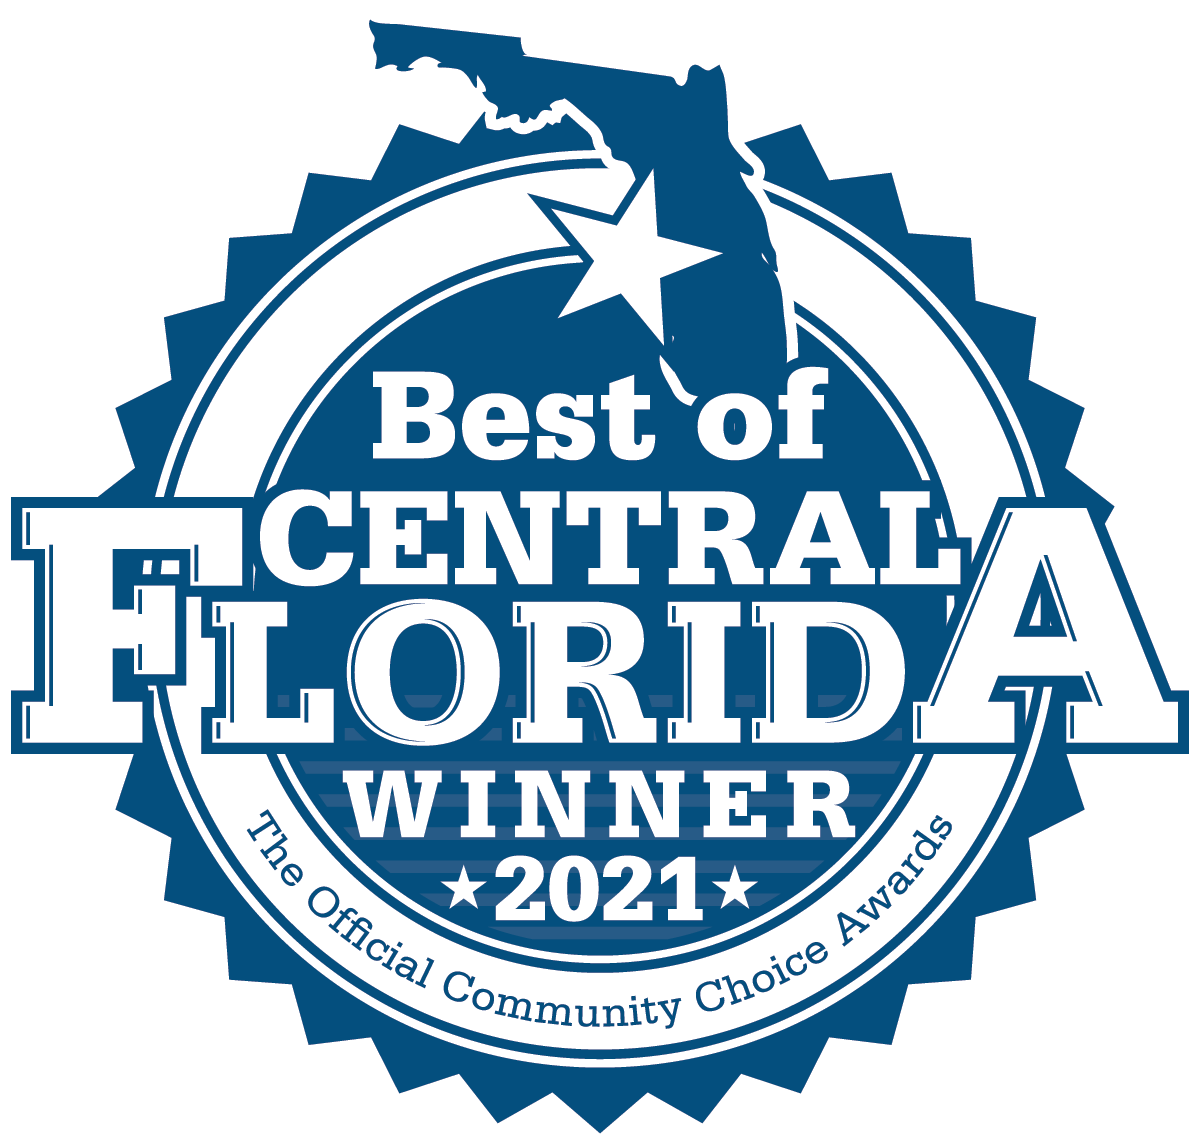 Best of Central Florida 2021